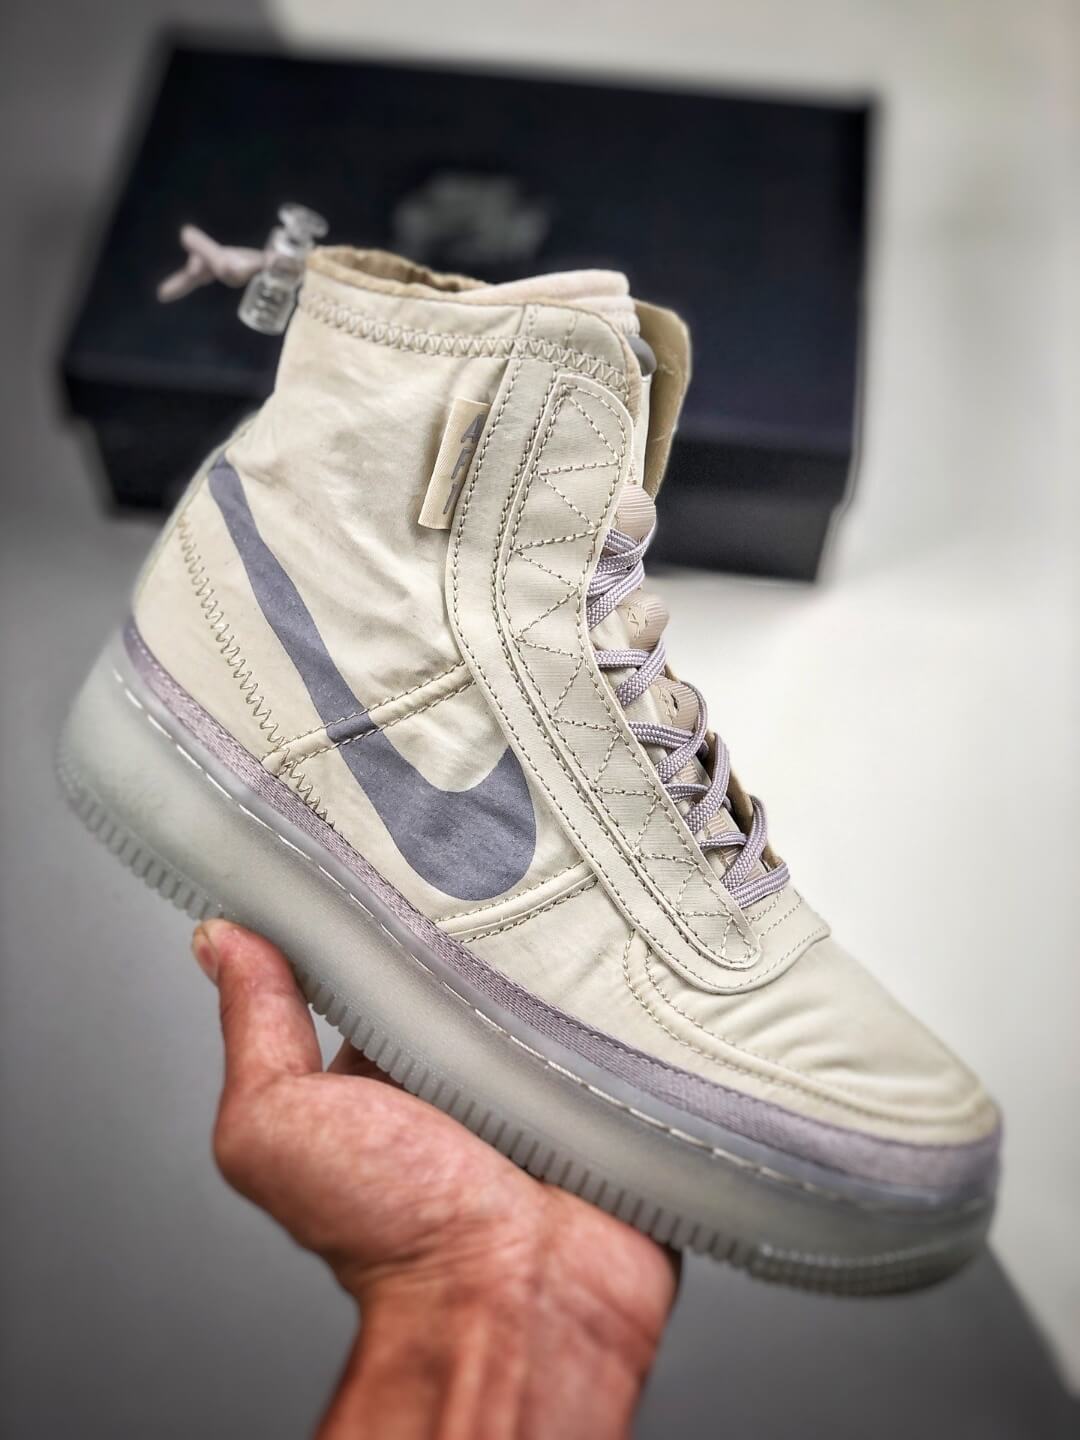 The Wmns Air Force 1 High Shell Sail Tan Water-Repellent Upper Top Quality RepShoes